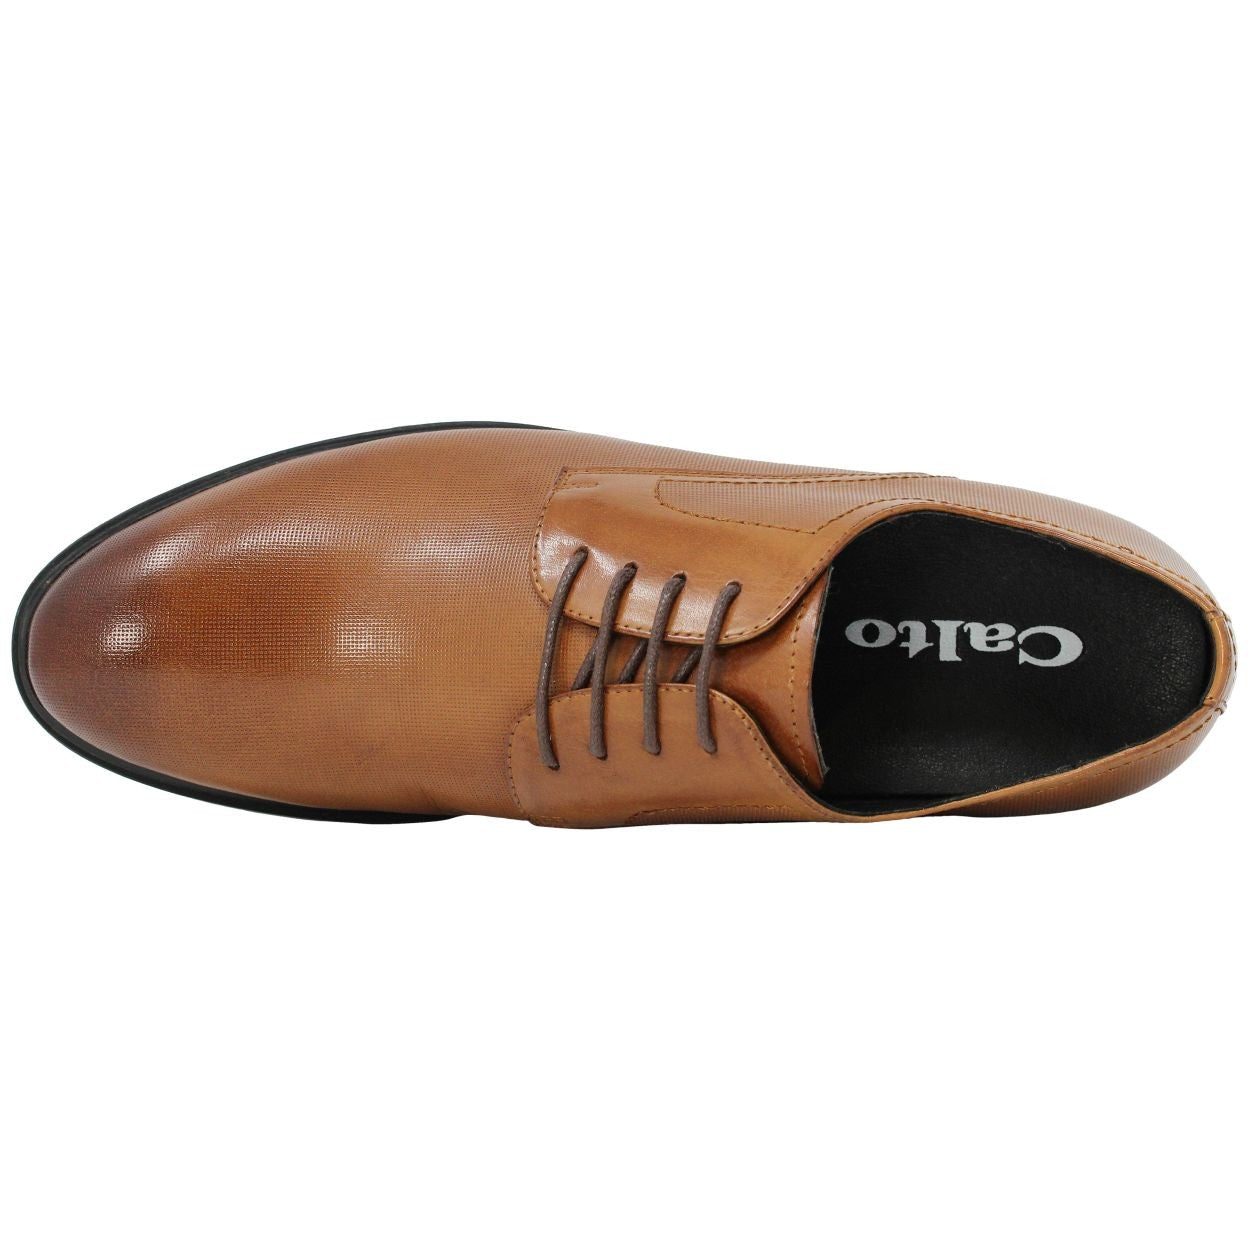 Elevator shoes height increase CALTO - Y10752 - 3 Inches Taller (Tan Brown) - Lightweight